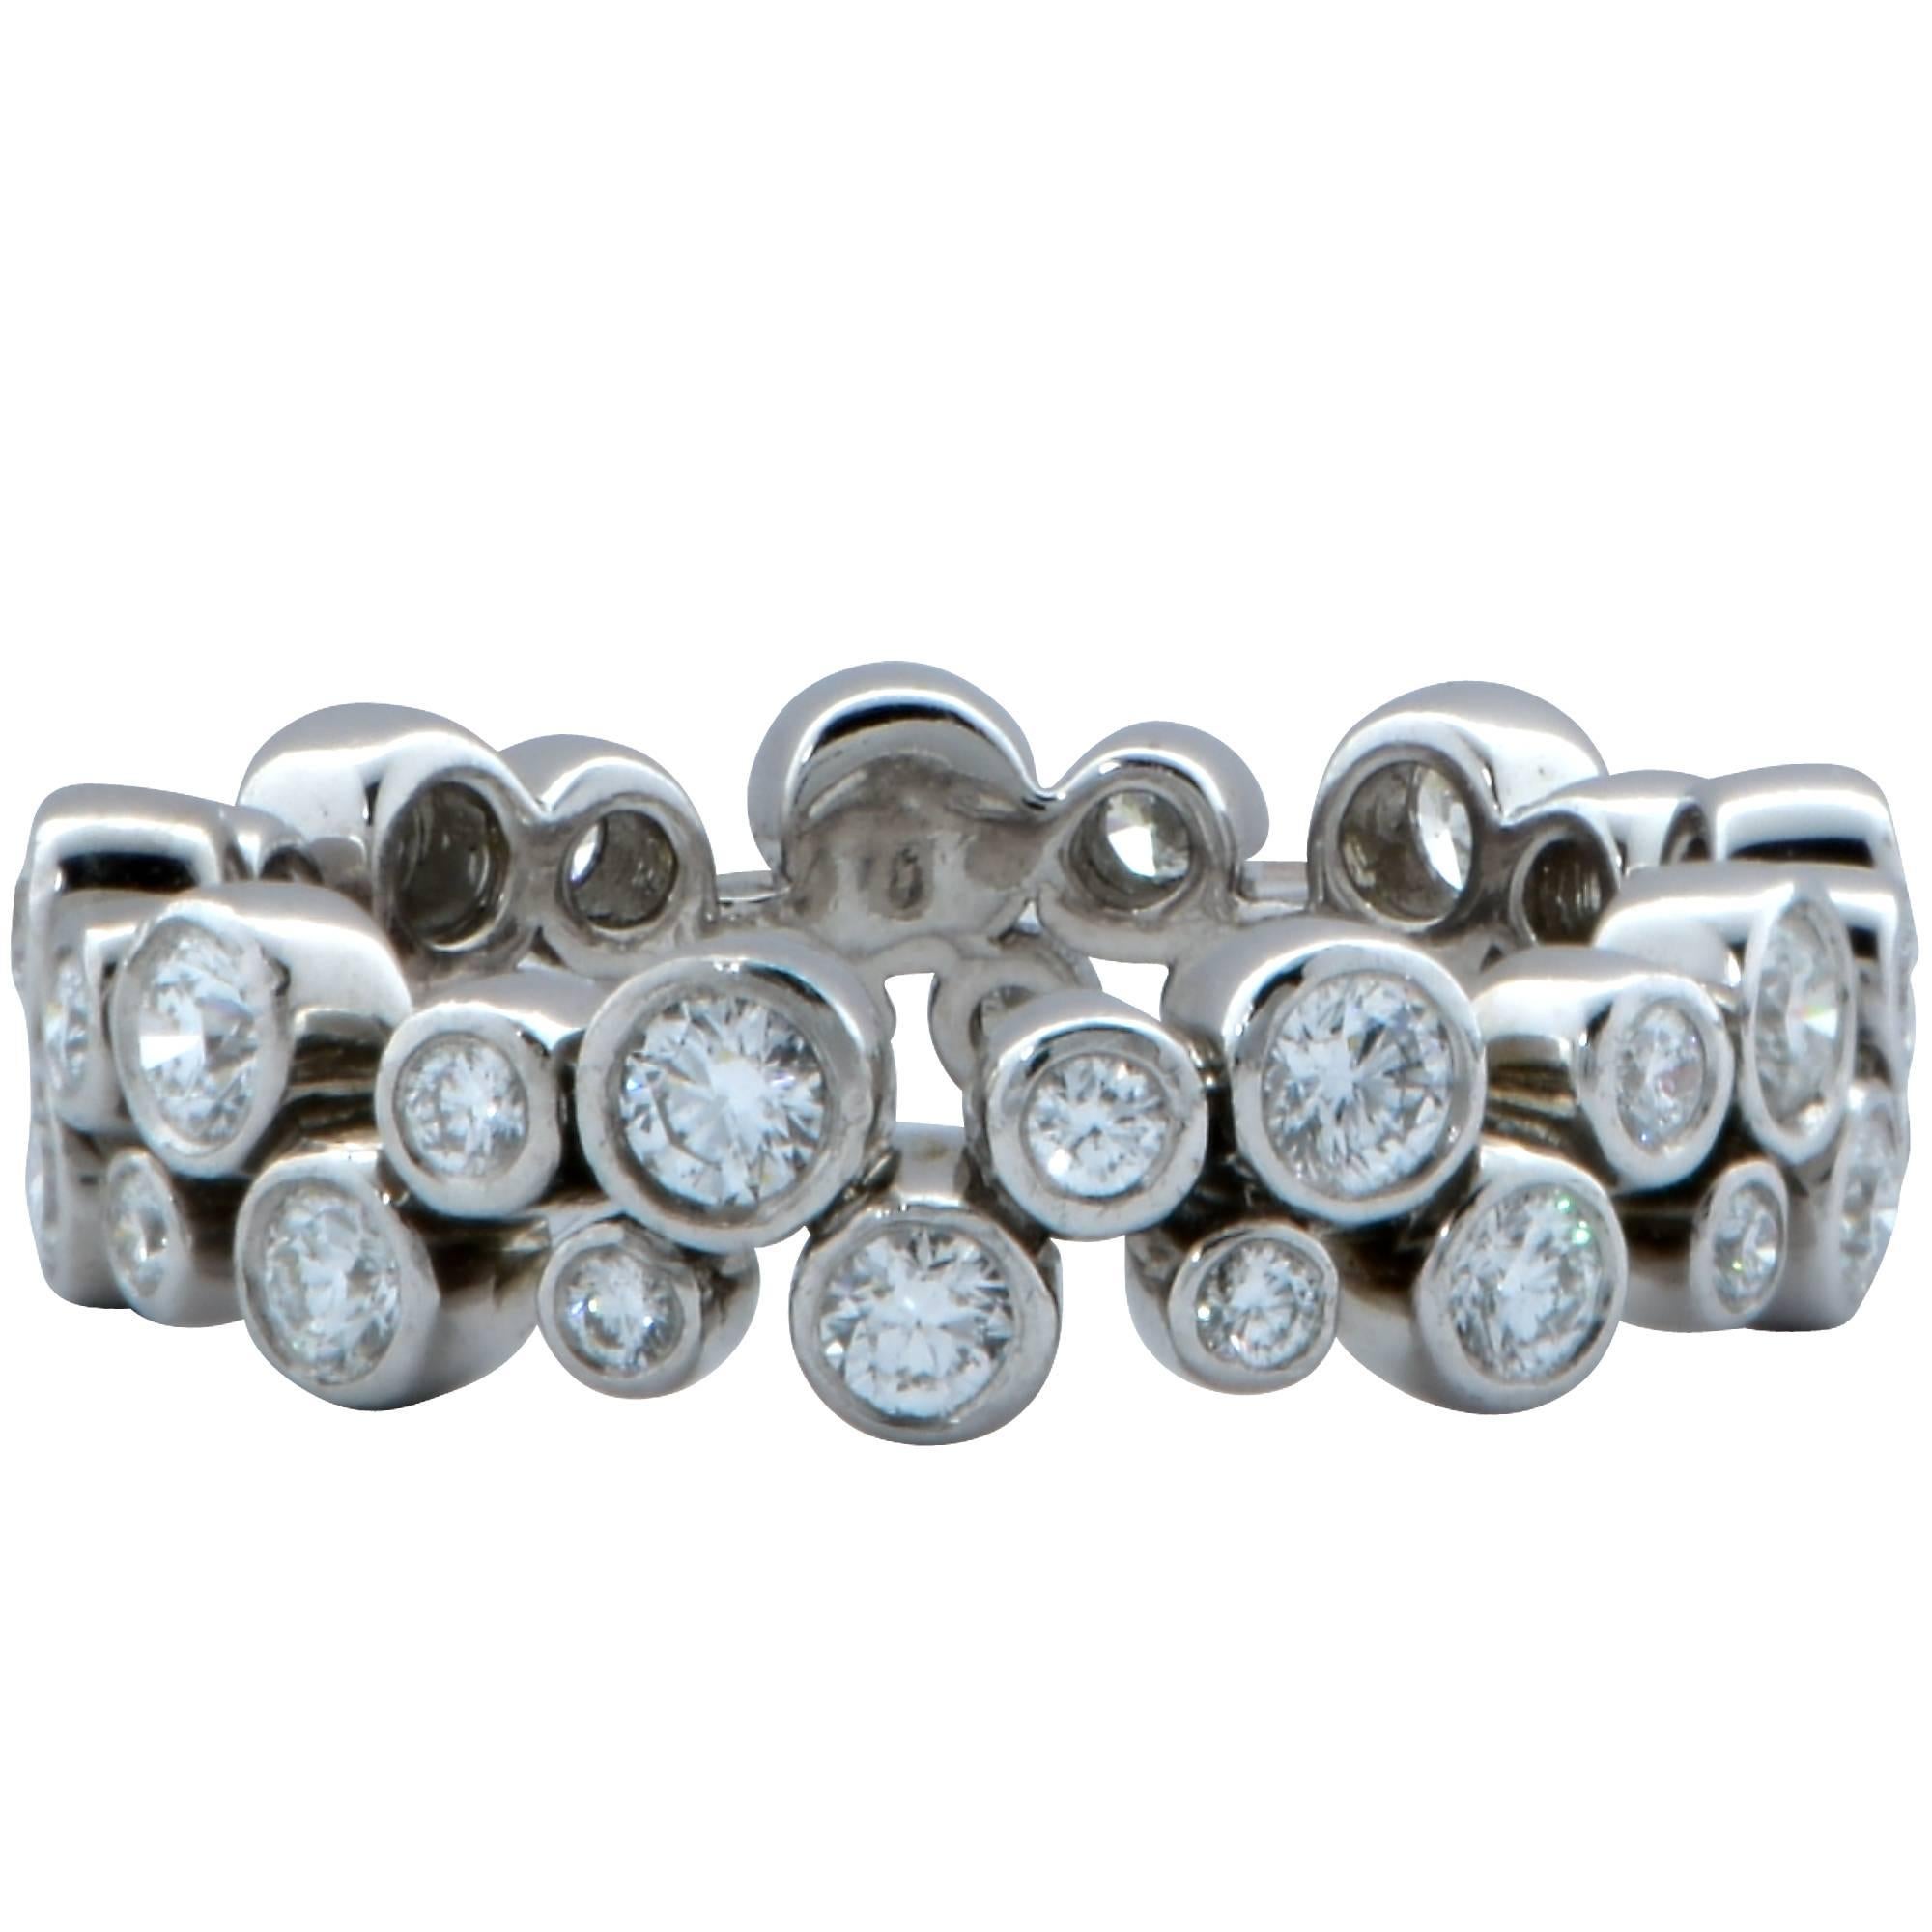 A fabulous creation from the bubbles collection, this band features 36 round brilliant cut diamonds weighing approximately 1 carat total, F color, VVS1-VVS clarity. Crafted in platinum 950, this ring exudes Tiffany & Co.’s spectacular